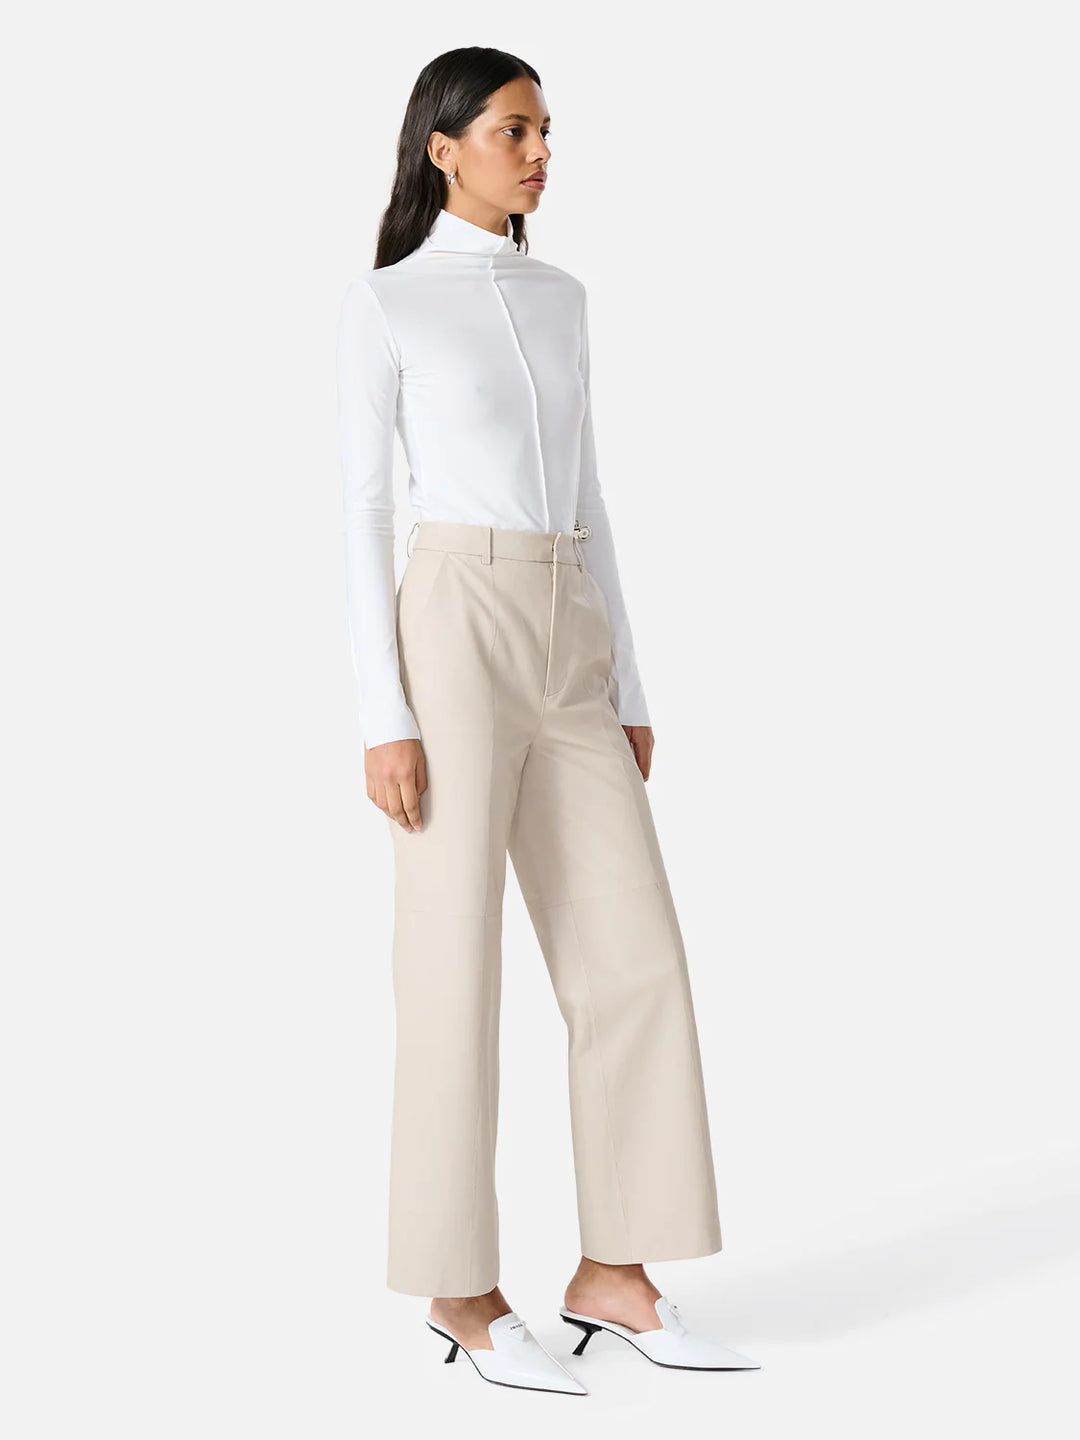 Stanford Leather Pant- Turtle Dove